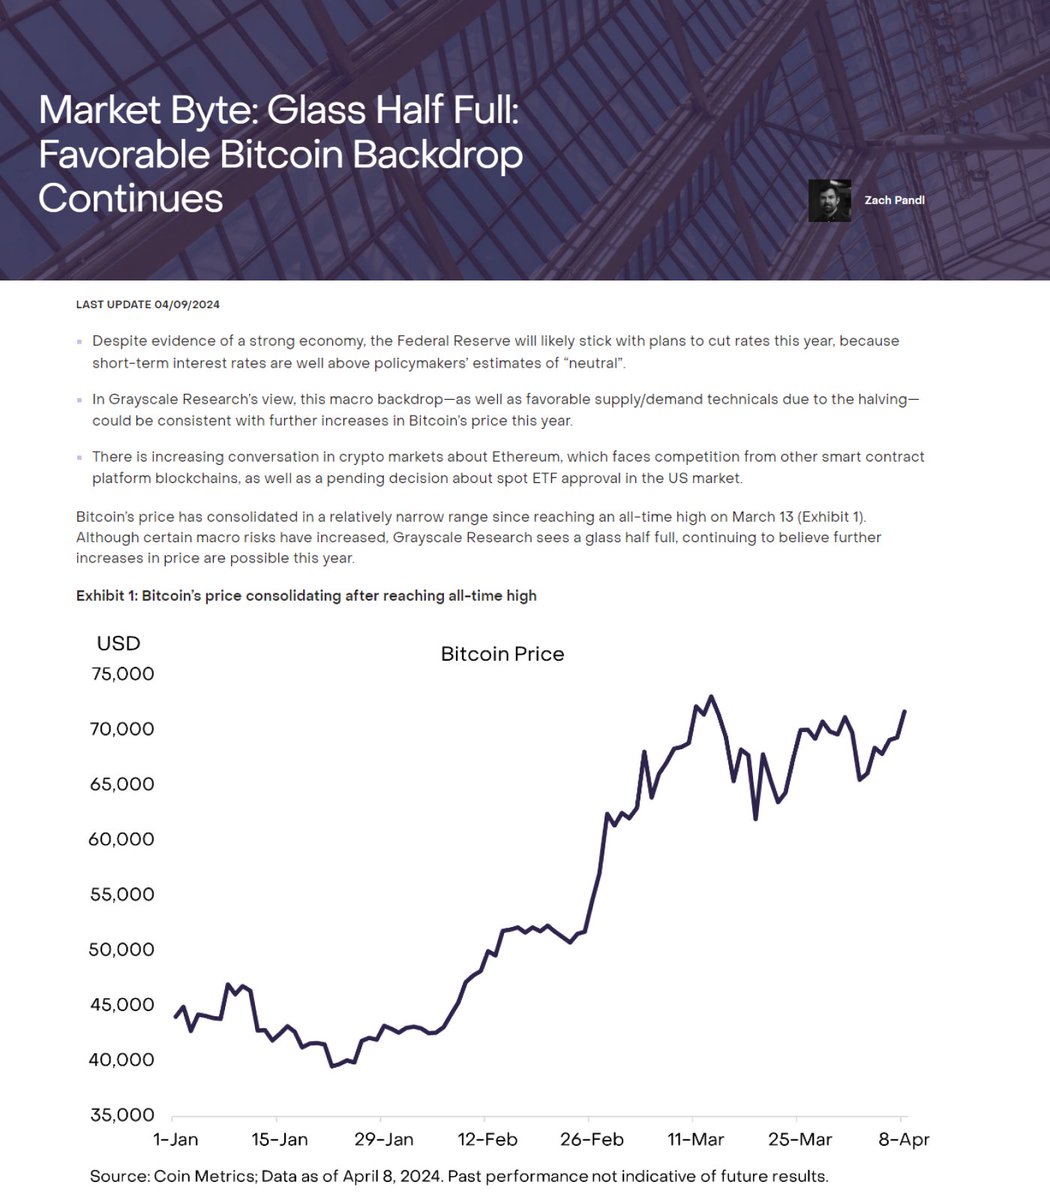 #Bitcoin's price has the potential to recover amid macro factors and the #2024halving. #Ethereum faces competition, but we remain optimistic about its long-term potential. Read the full report from Grayscale Research and @LowBeta_: grayscale.com/research/marke…